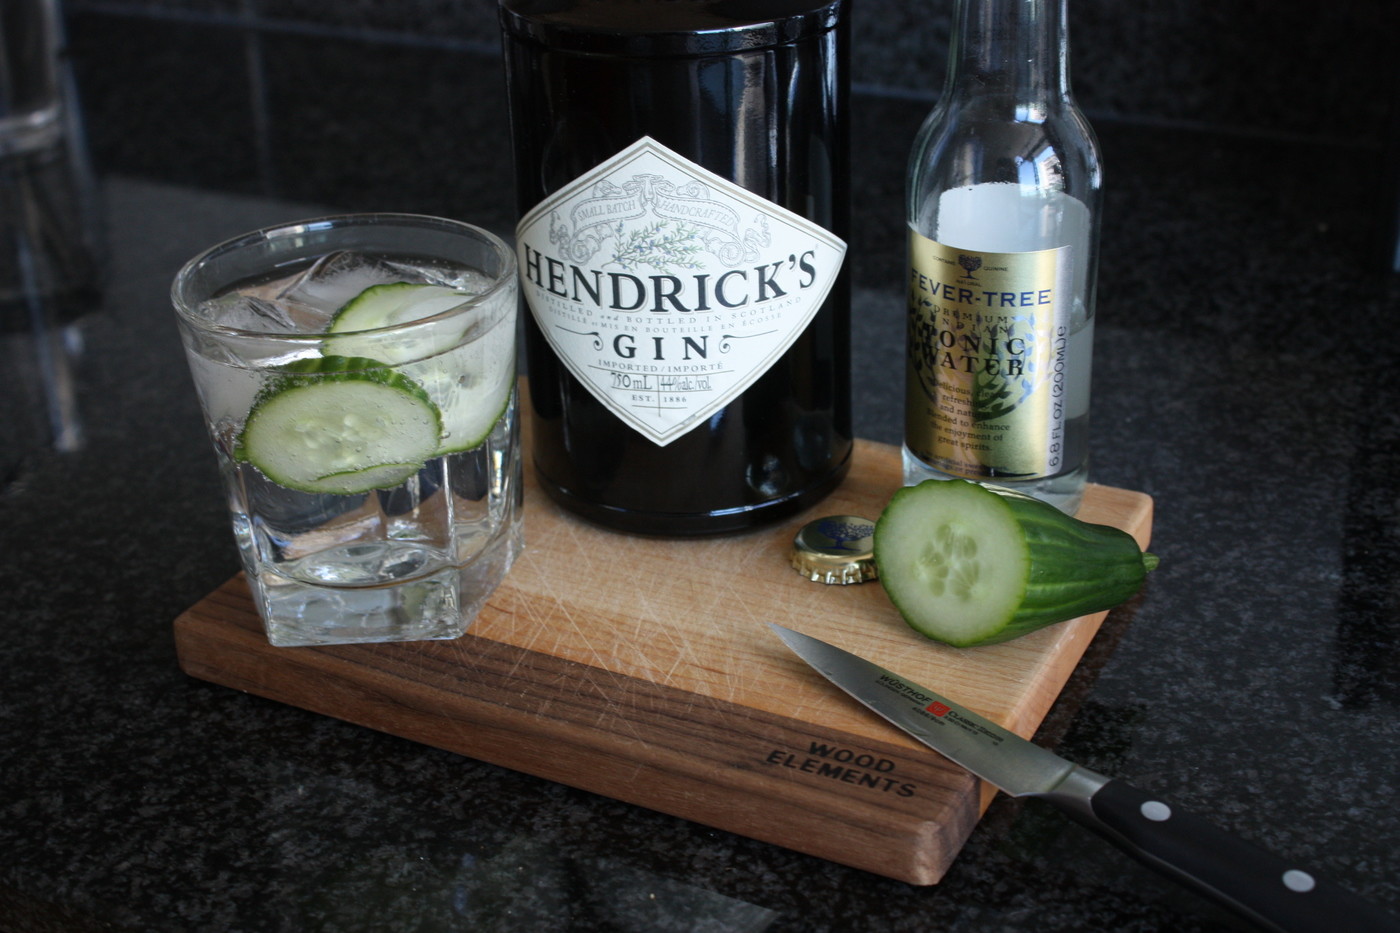 Cucumber gin and tonic made with Hendrick's gin, Fever Tree tonic water, and English cucumber